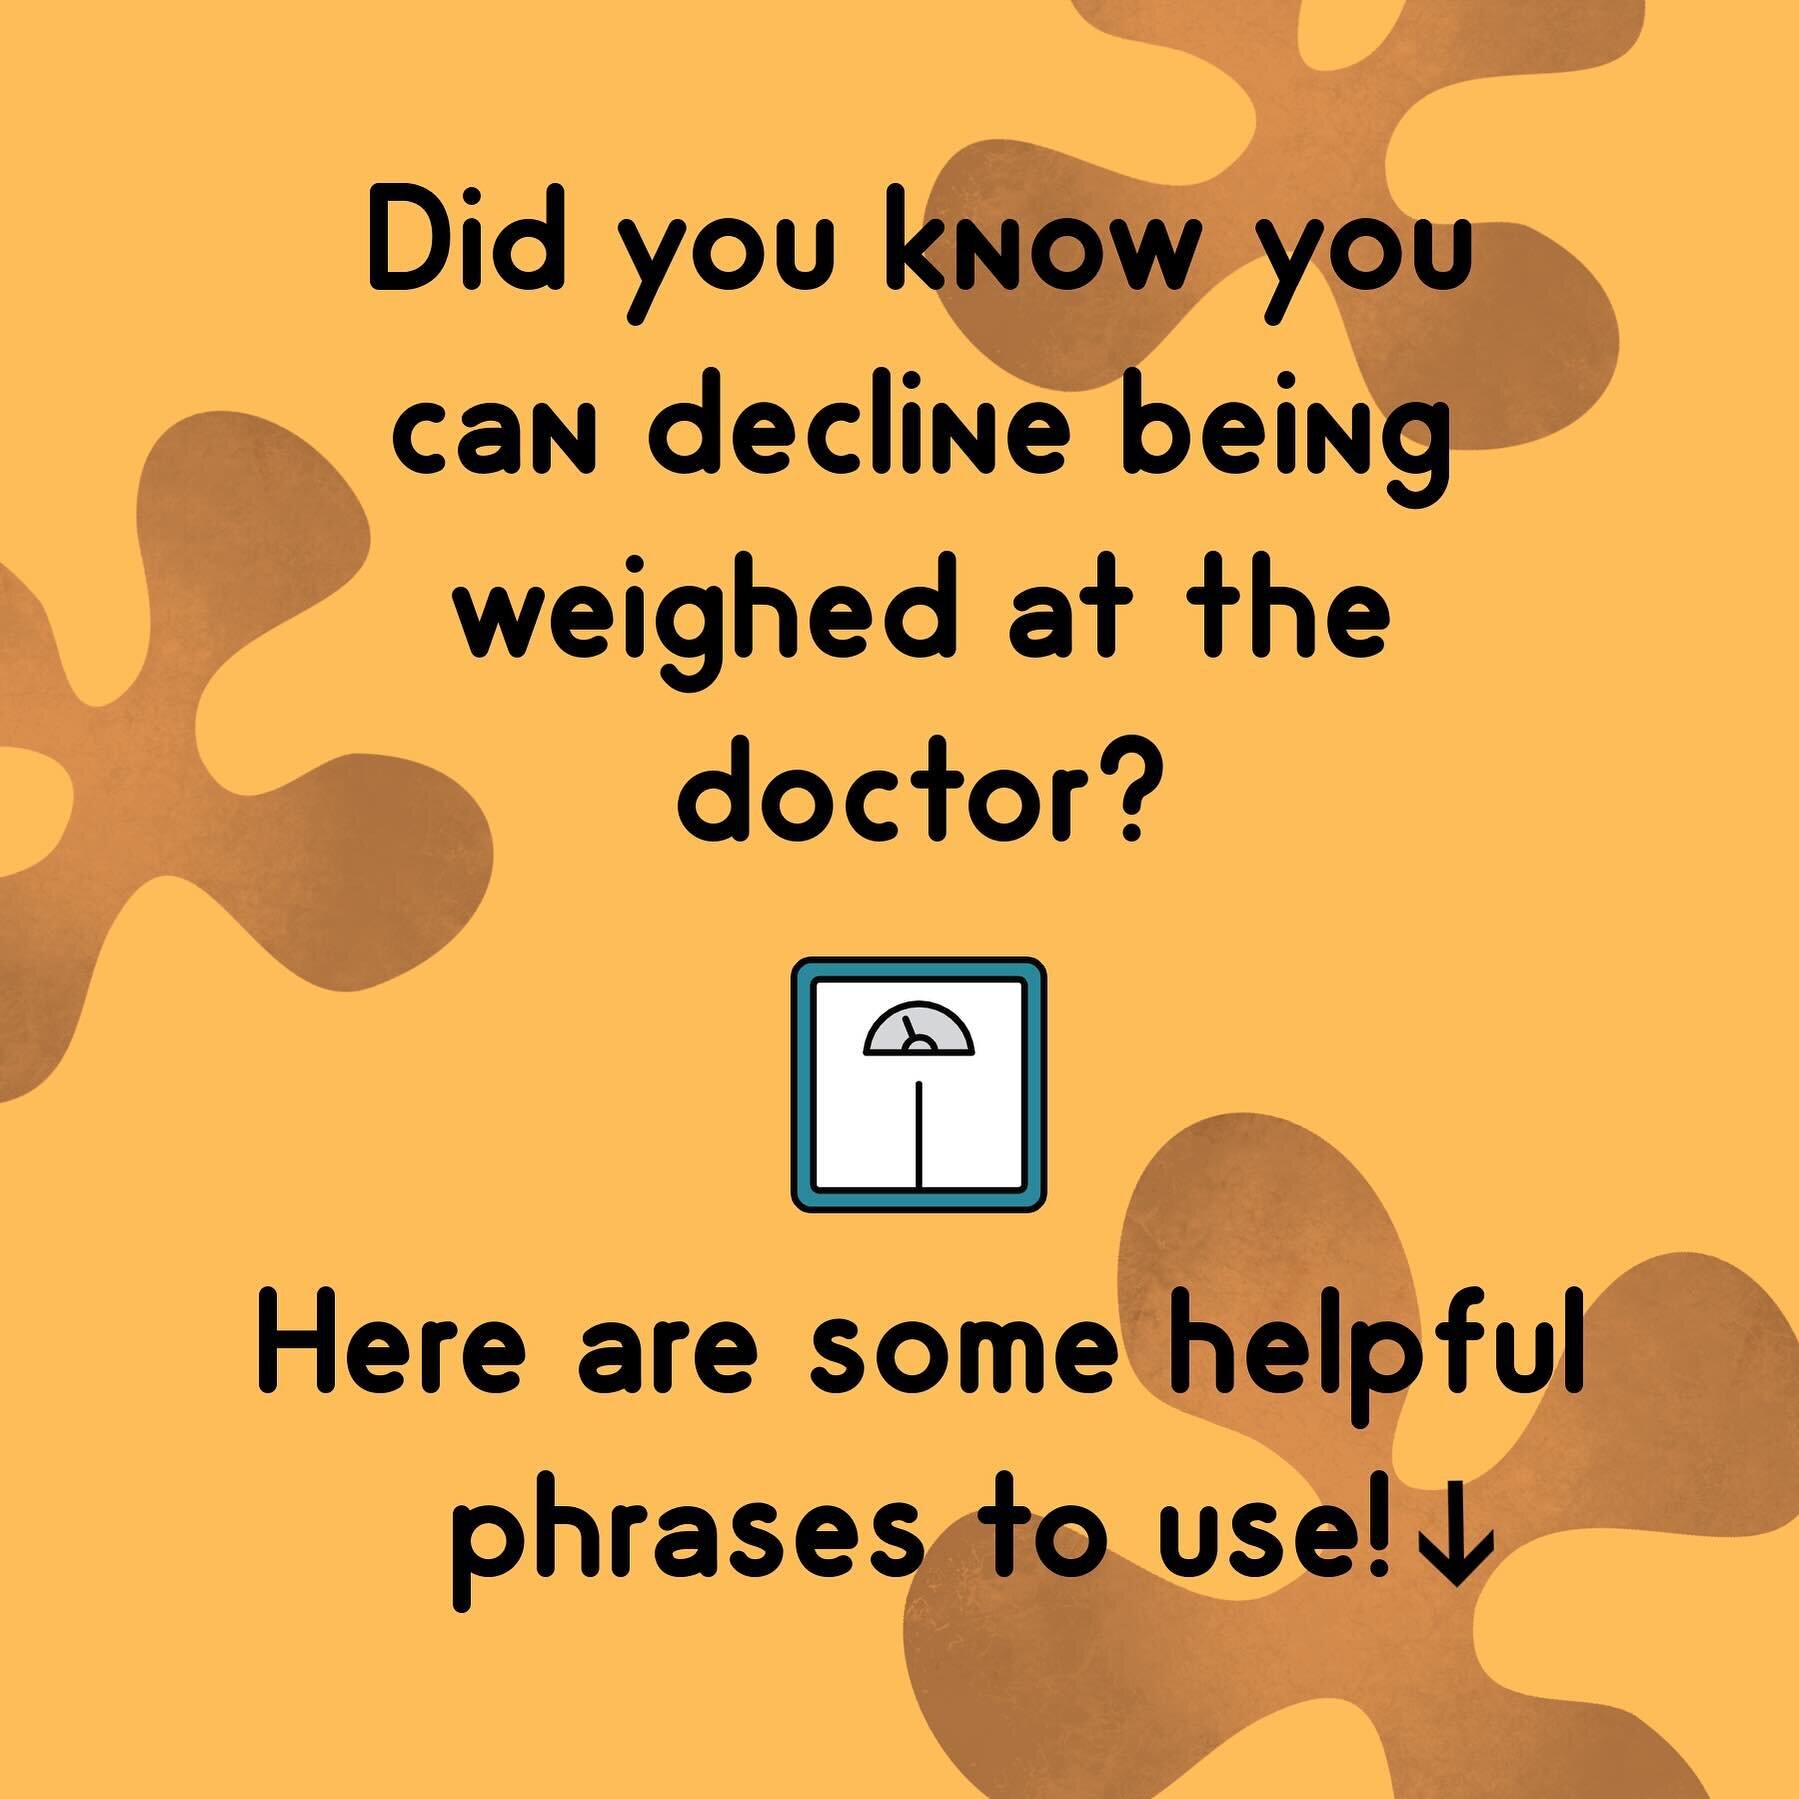 Did you know that you can decline being weighed at your doctor&rsquo;s appointment? Here are some phrases you can use:

1. &ldquo;I prefer not to be weighed today, thank you.&rdquo;
2. &ldquo;I&rsquo;m currently focusing on my overall health rather t